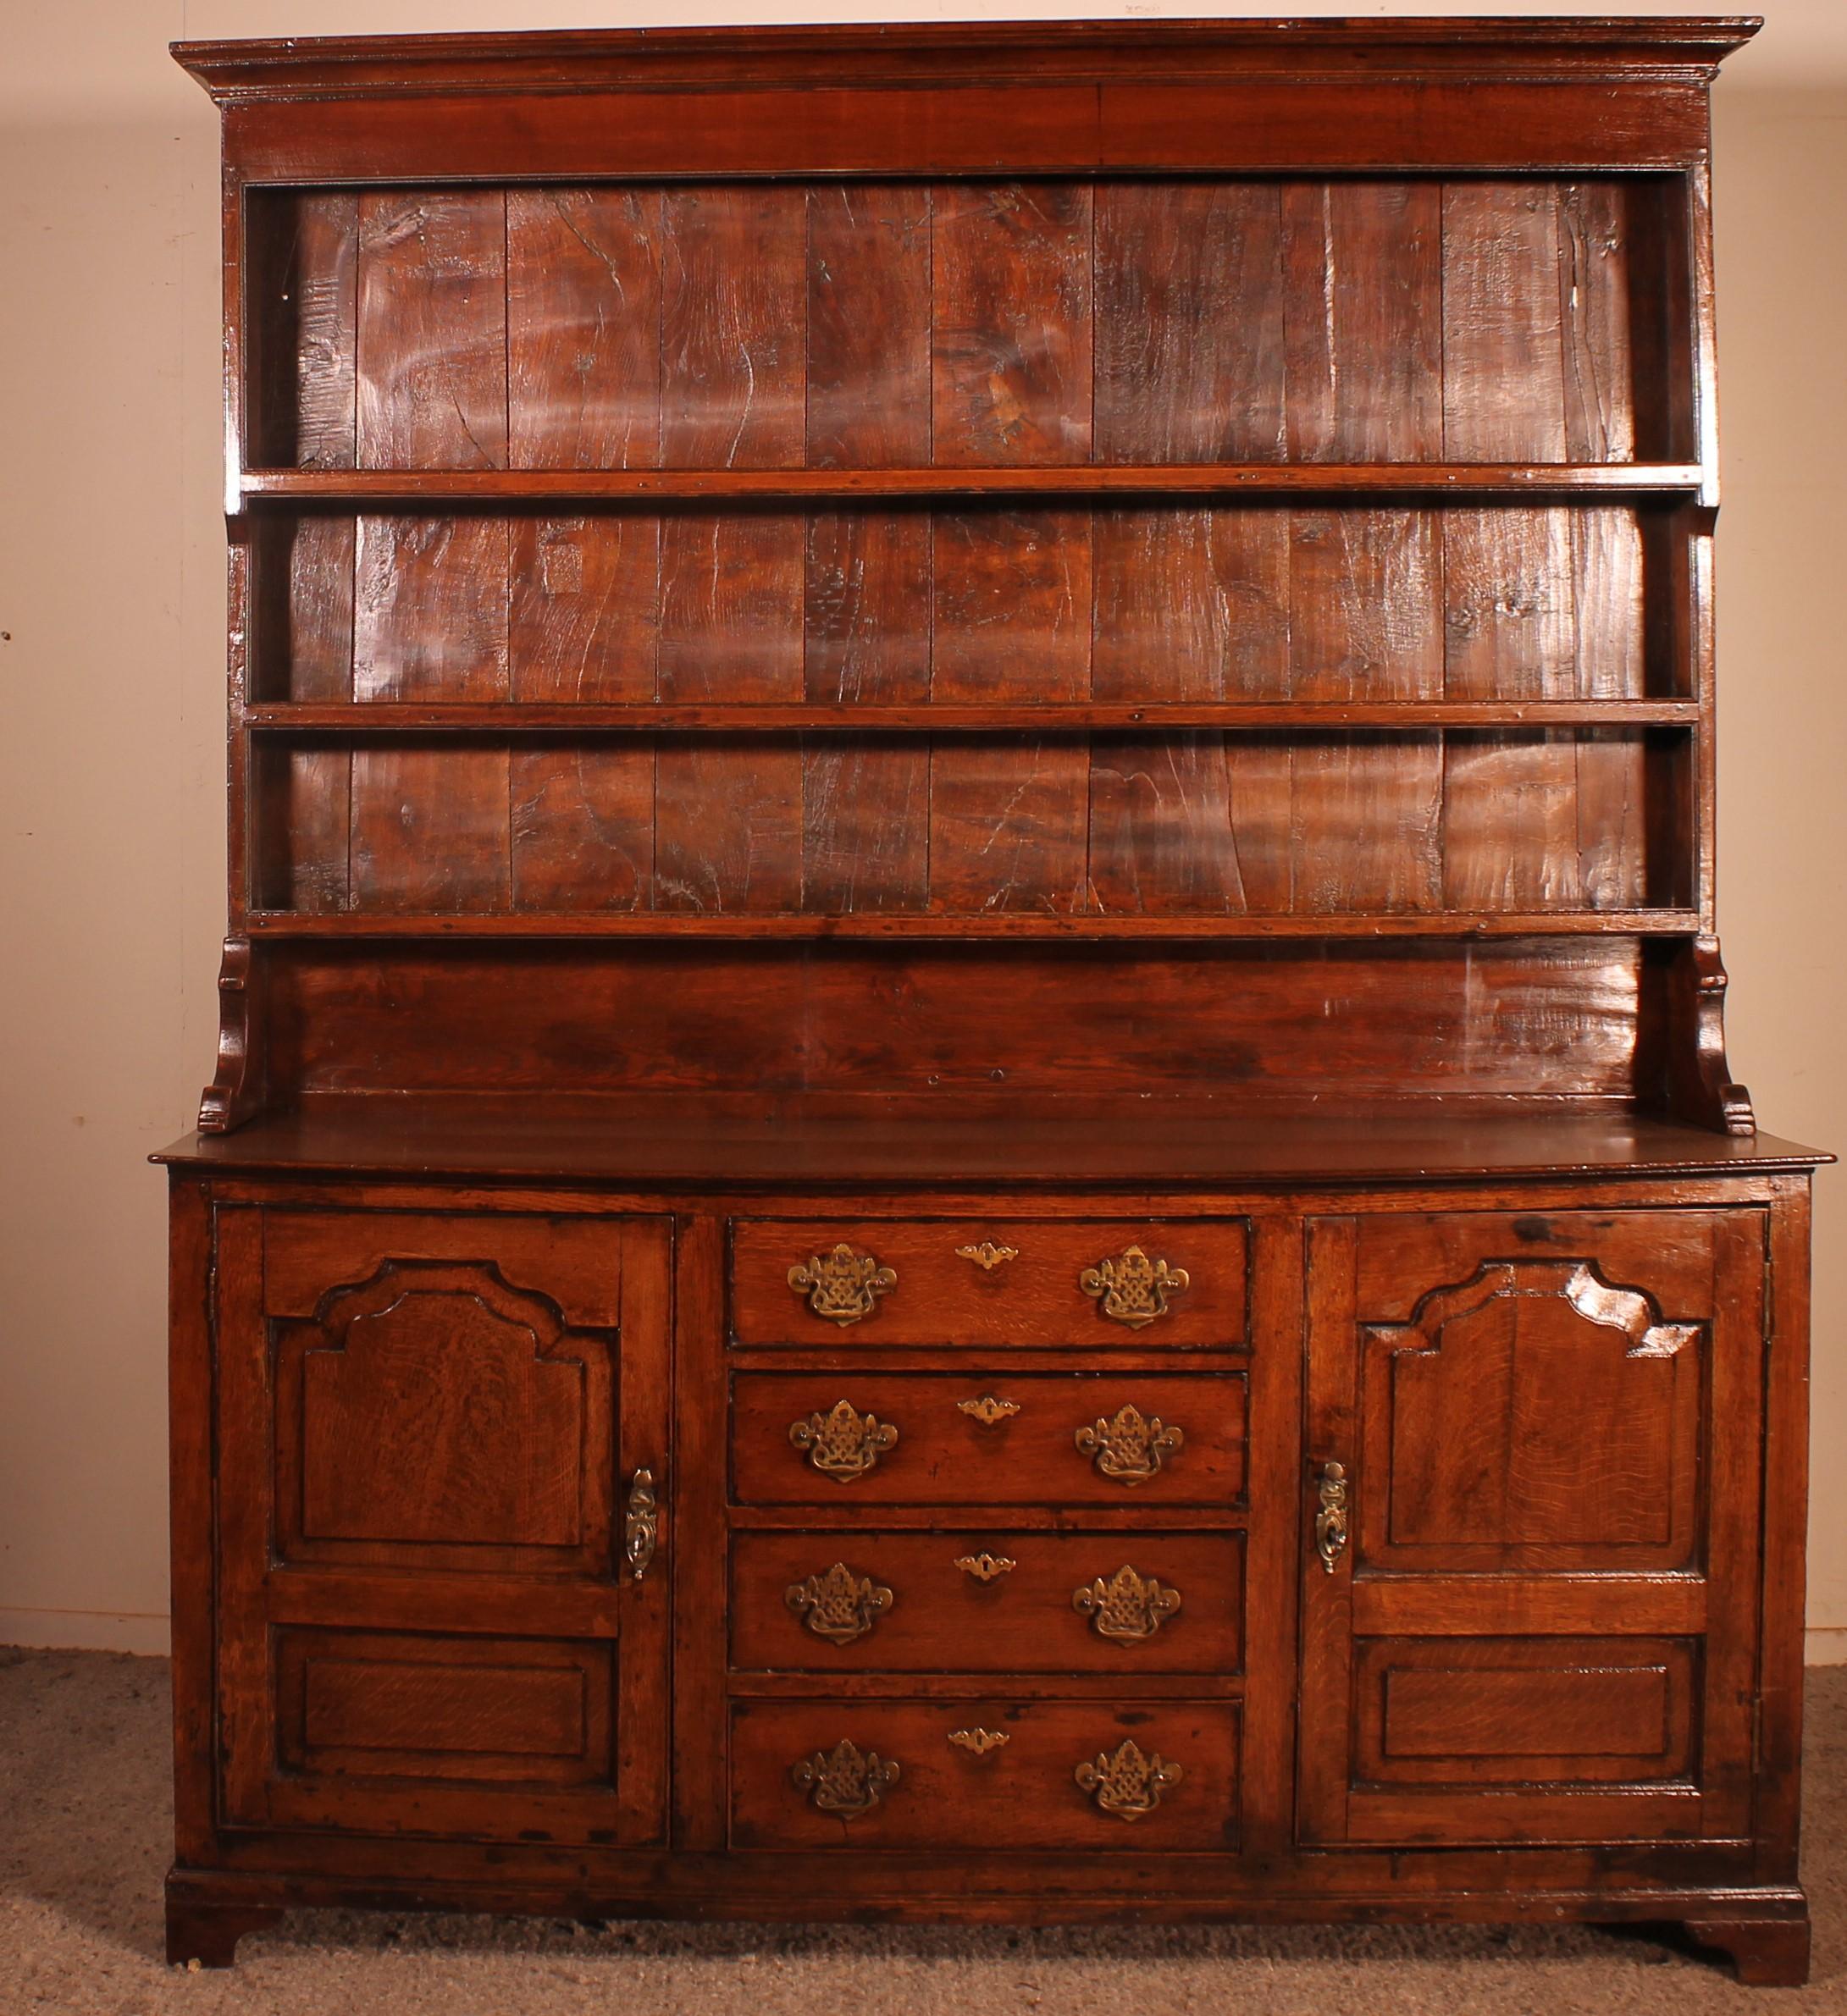 Superb English dresser from the beginning of the 18th century in oak
Very nice model with very beautiful molded doors. We can find a symmetry in the two doors. This indicates that it is from the beginning of the 18th century.

The bottom of the